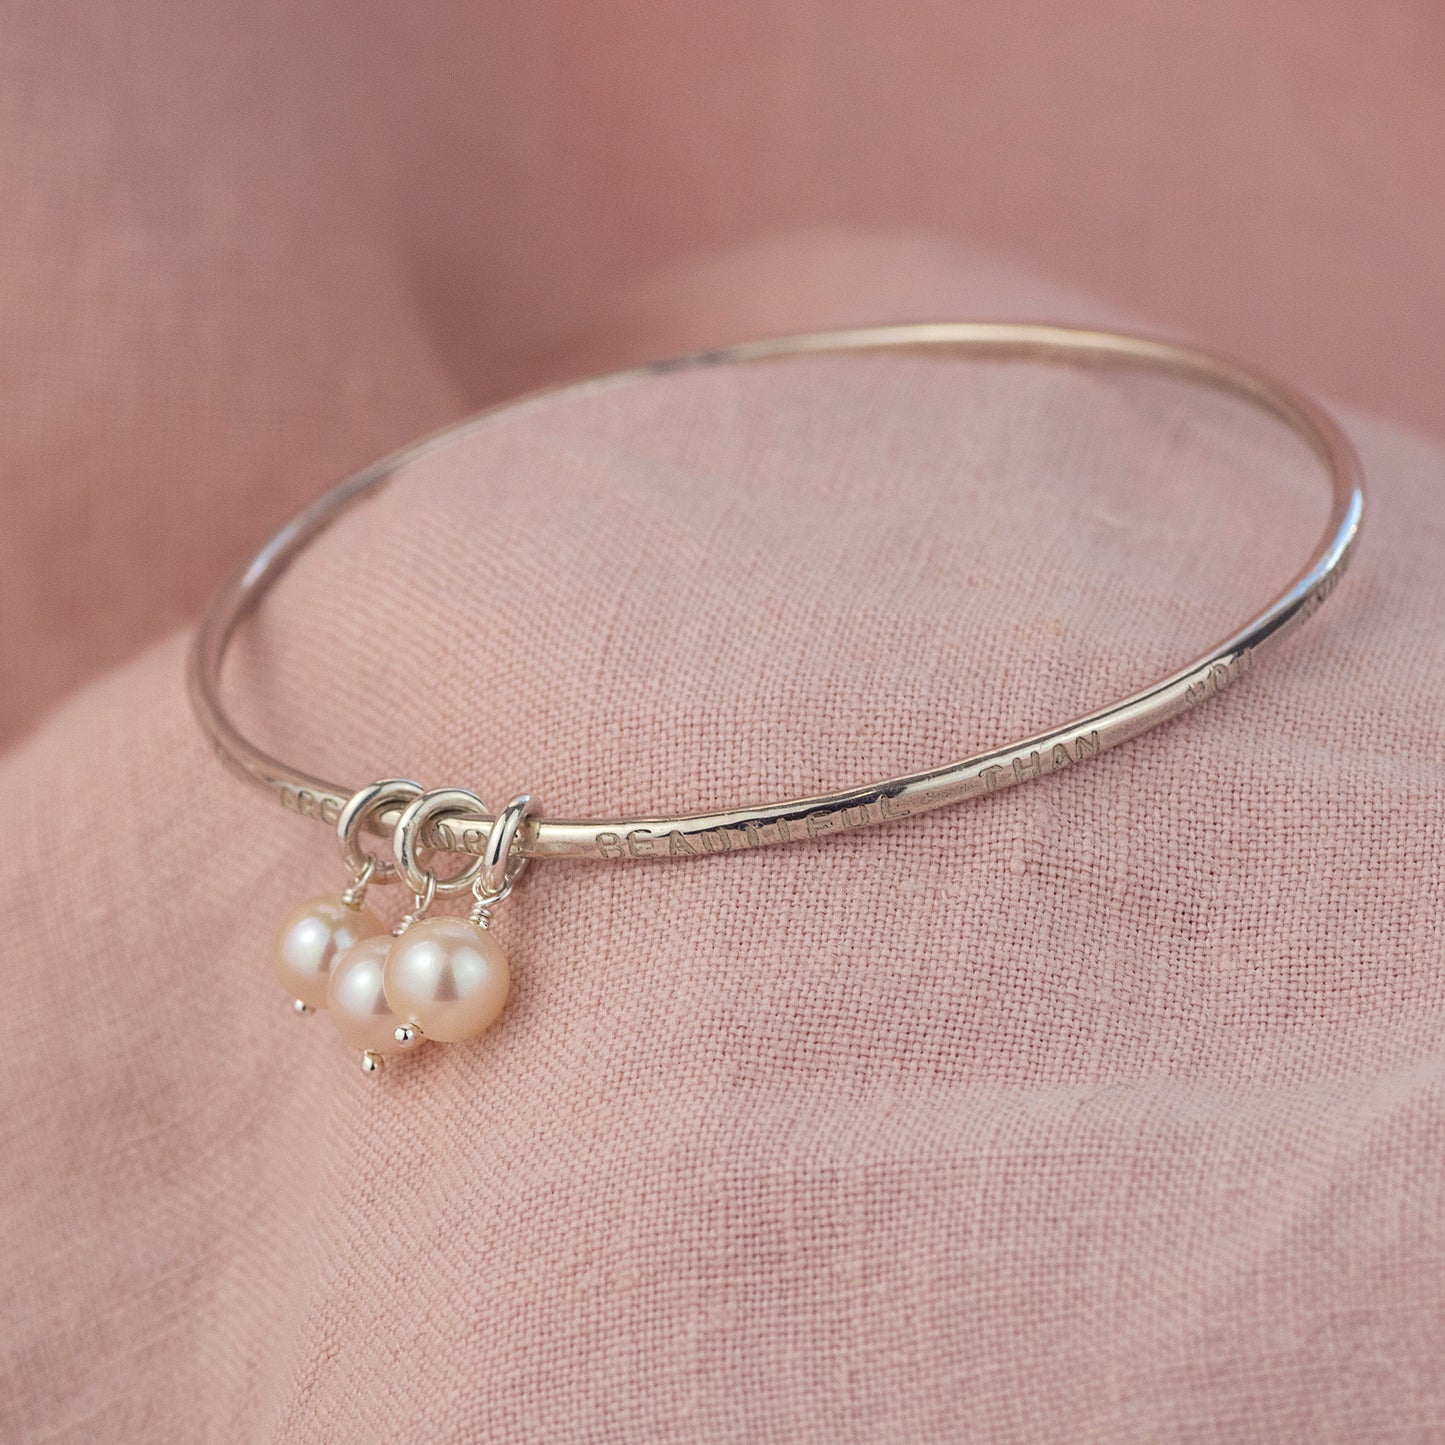 Personalised 30th Birthday Bangle - 3 Pearls for 3 Decades -  Silver Hand Stamped